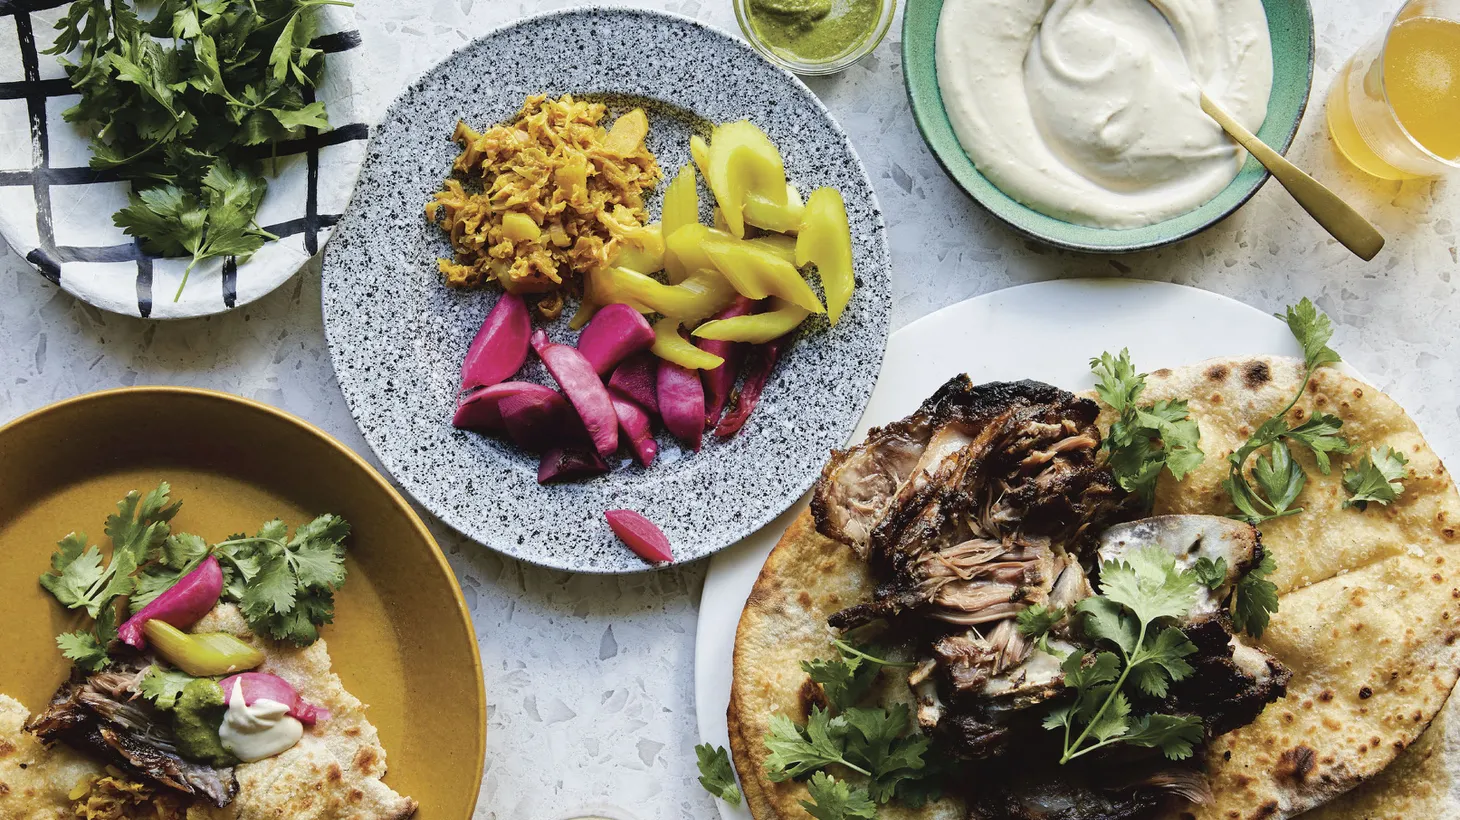 In their latest cookbook “Bavel,” Ori Menashe and Genevieve Gergis share recipes from the restaurant of the same name, including lamb neck shawarma.